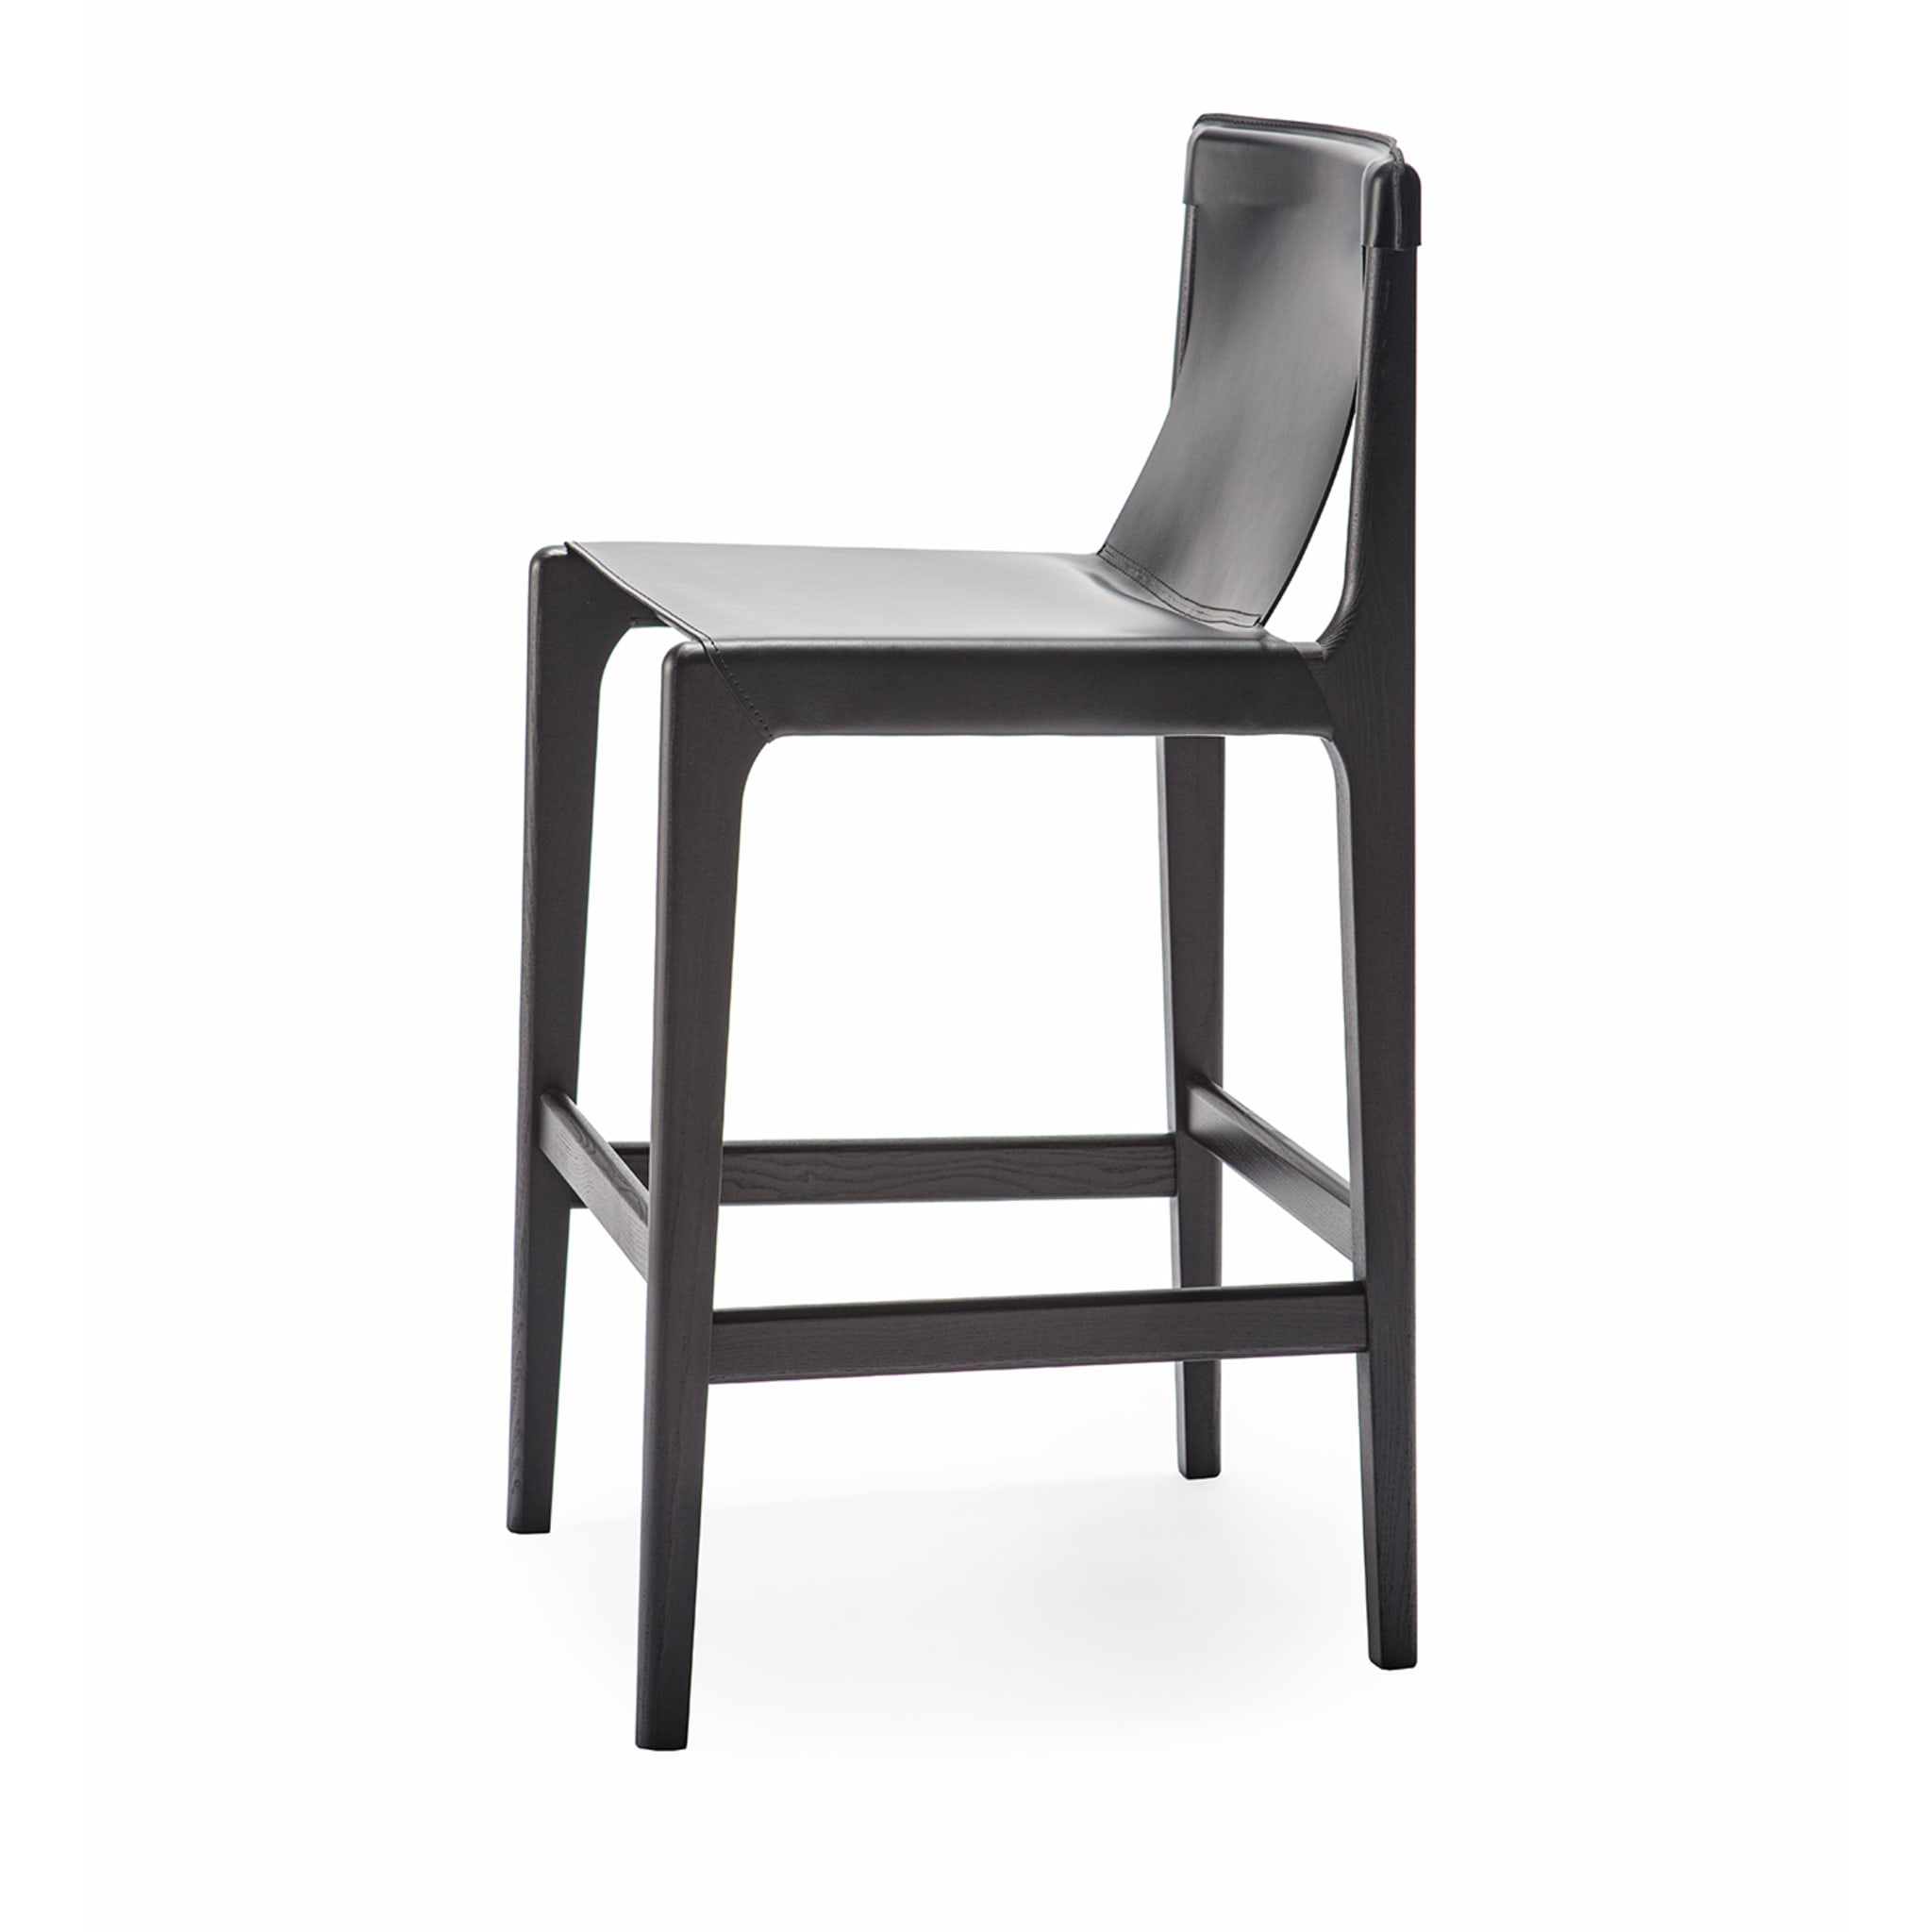 Burano/sg 30 Black Leather Counter Stool by Balutto Associati - Alternative view 2